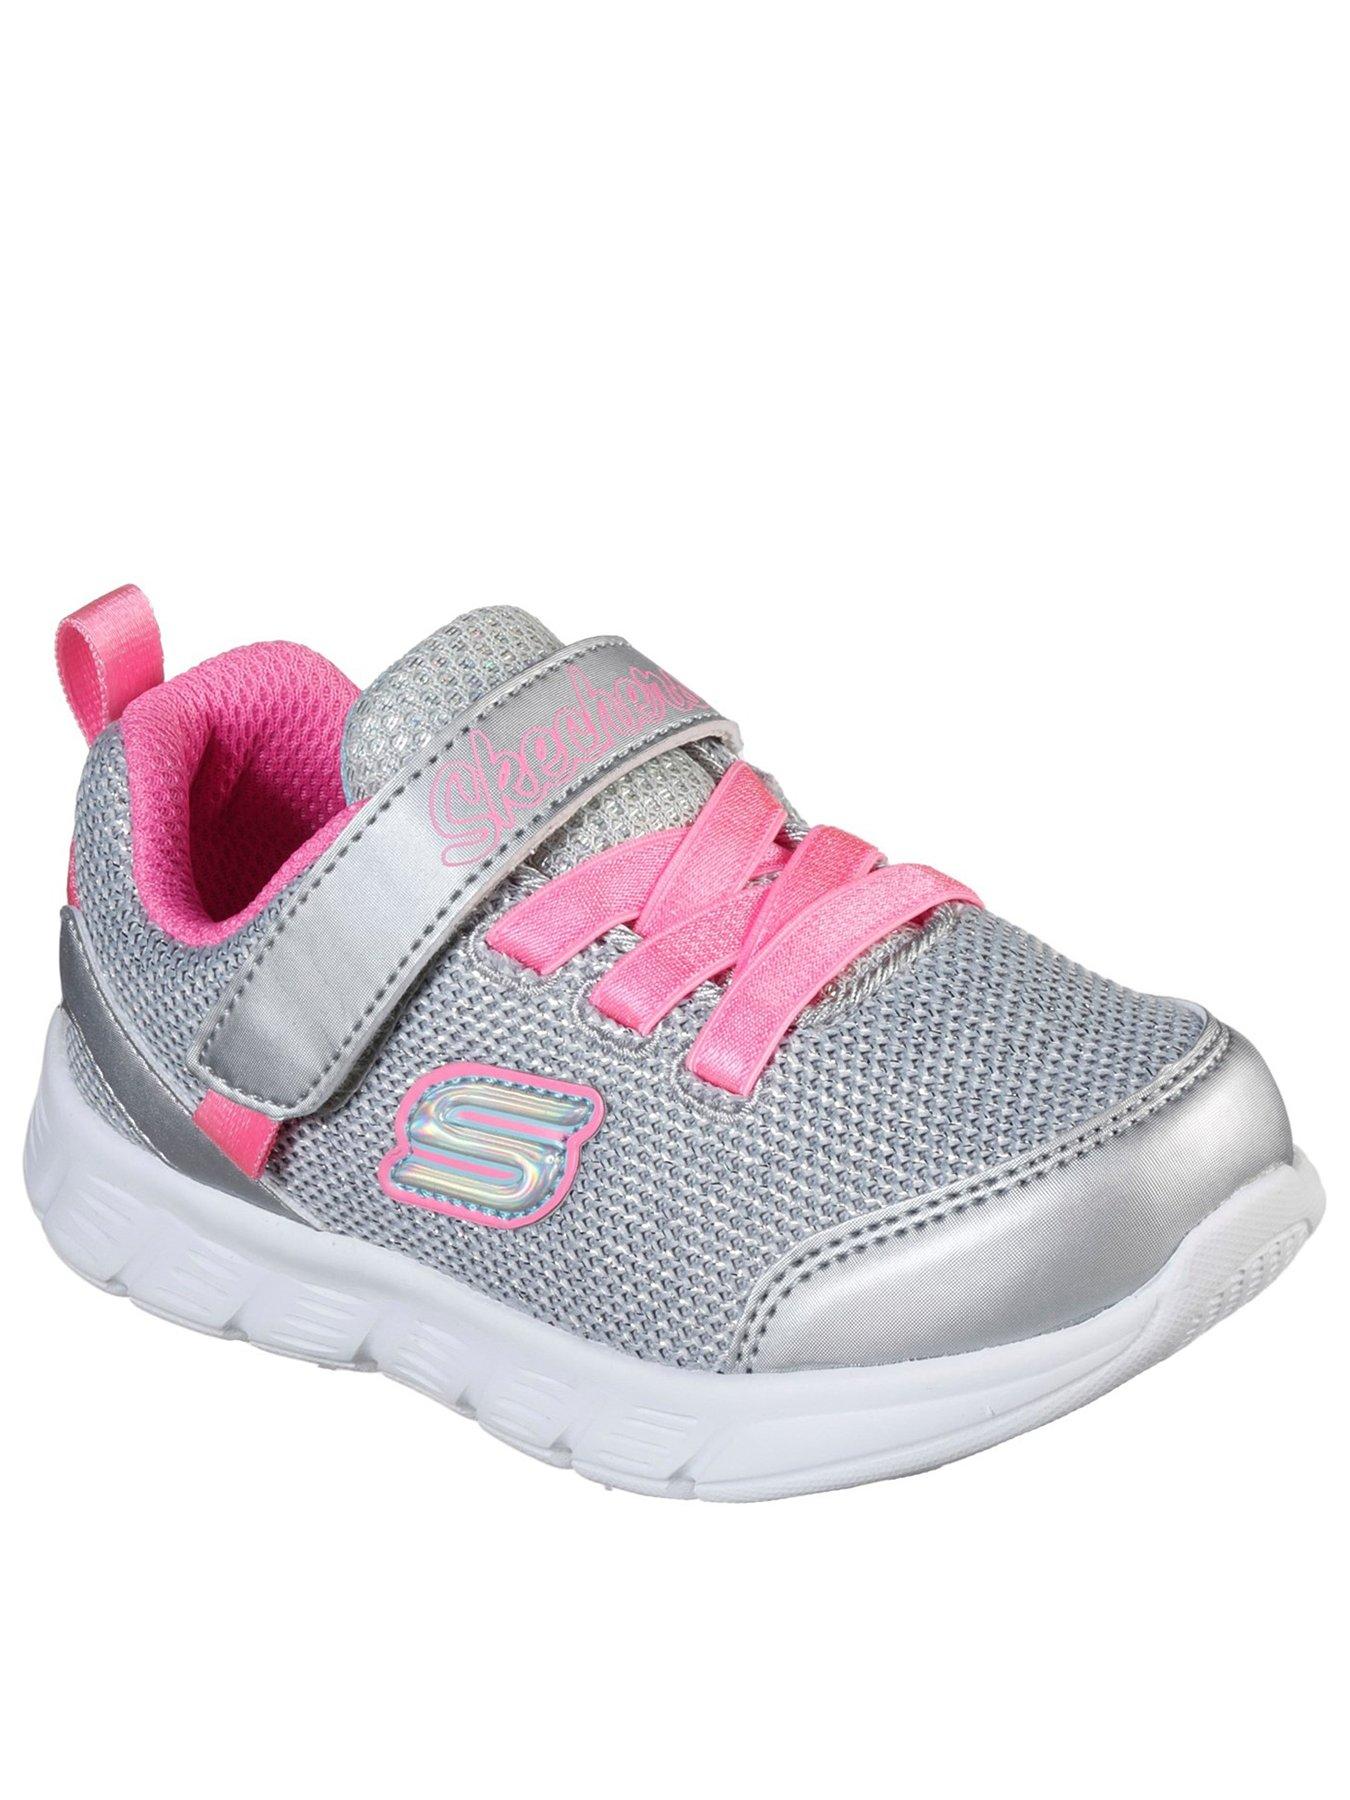 skechers street leather glitter toe cap lace up trainer